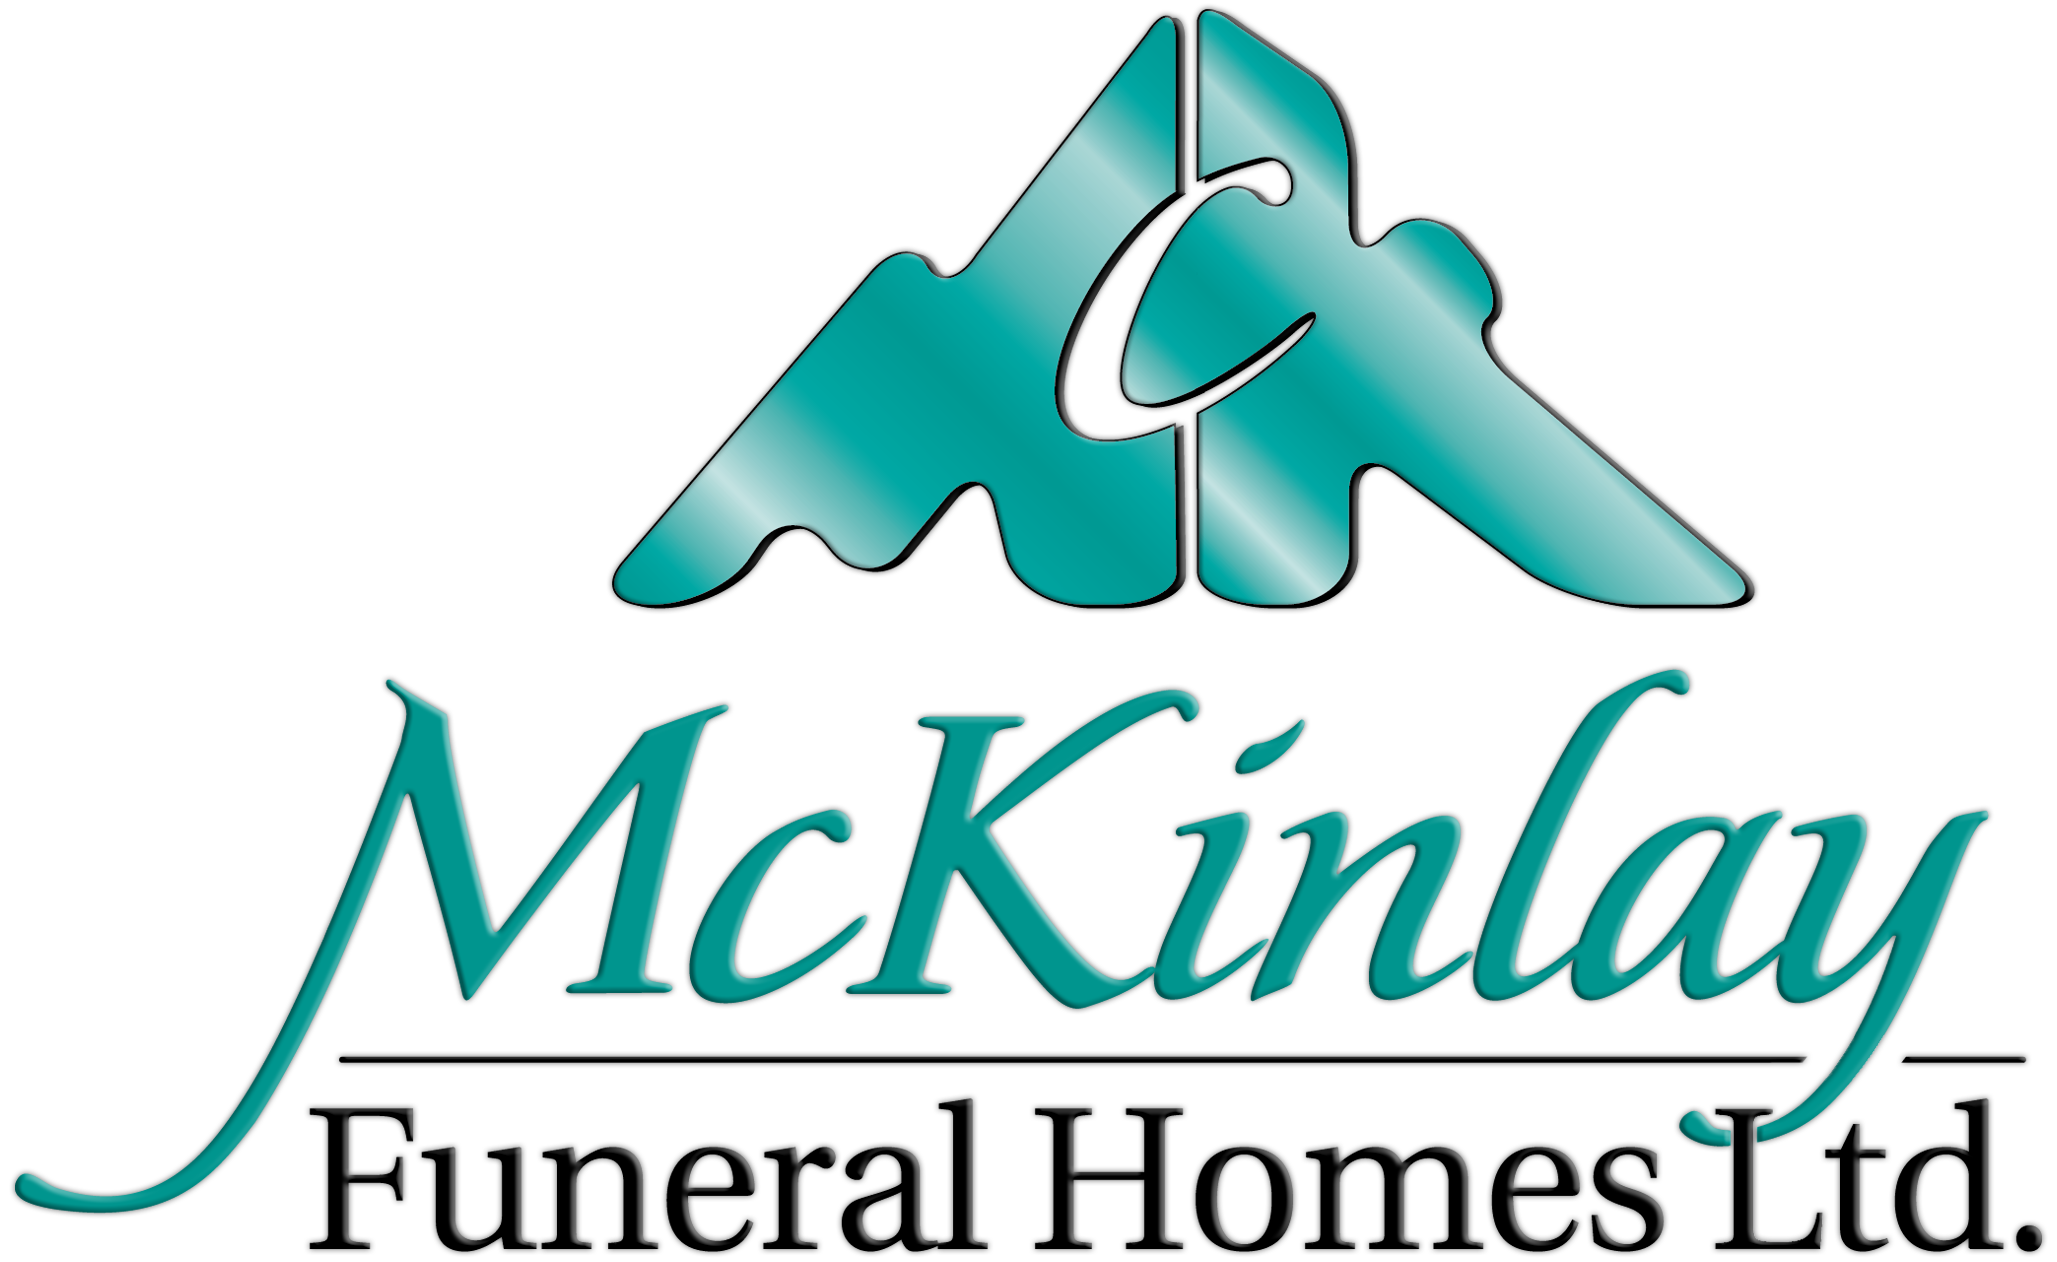 McKinlay Funeral Homes